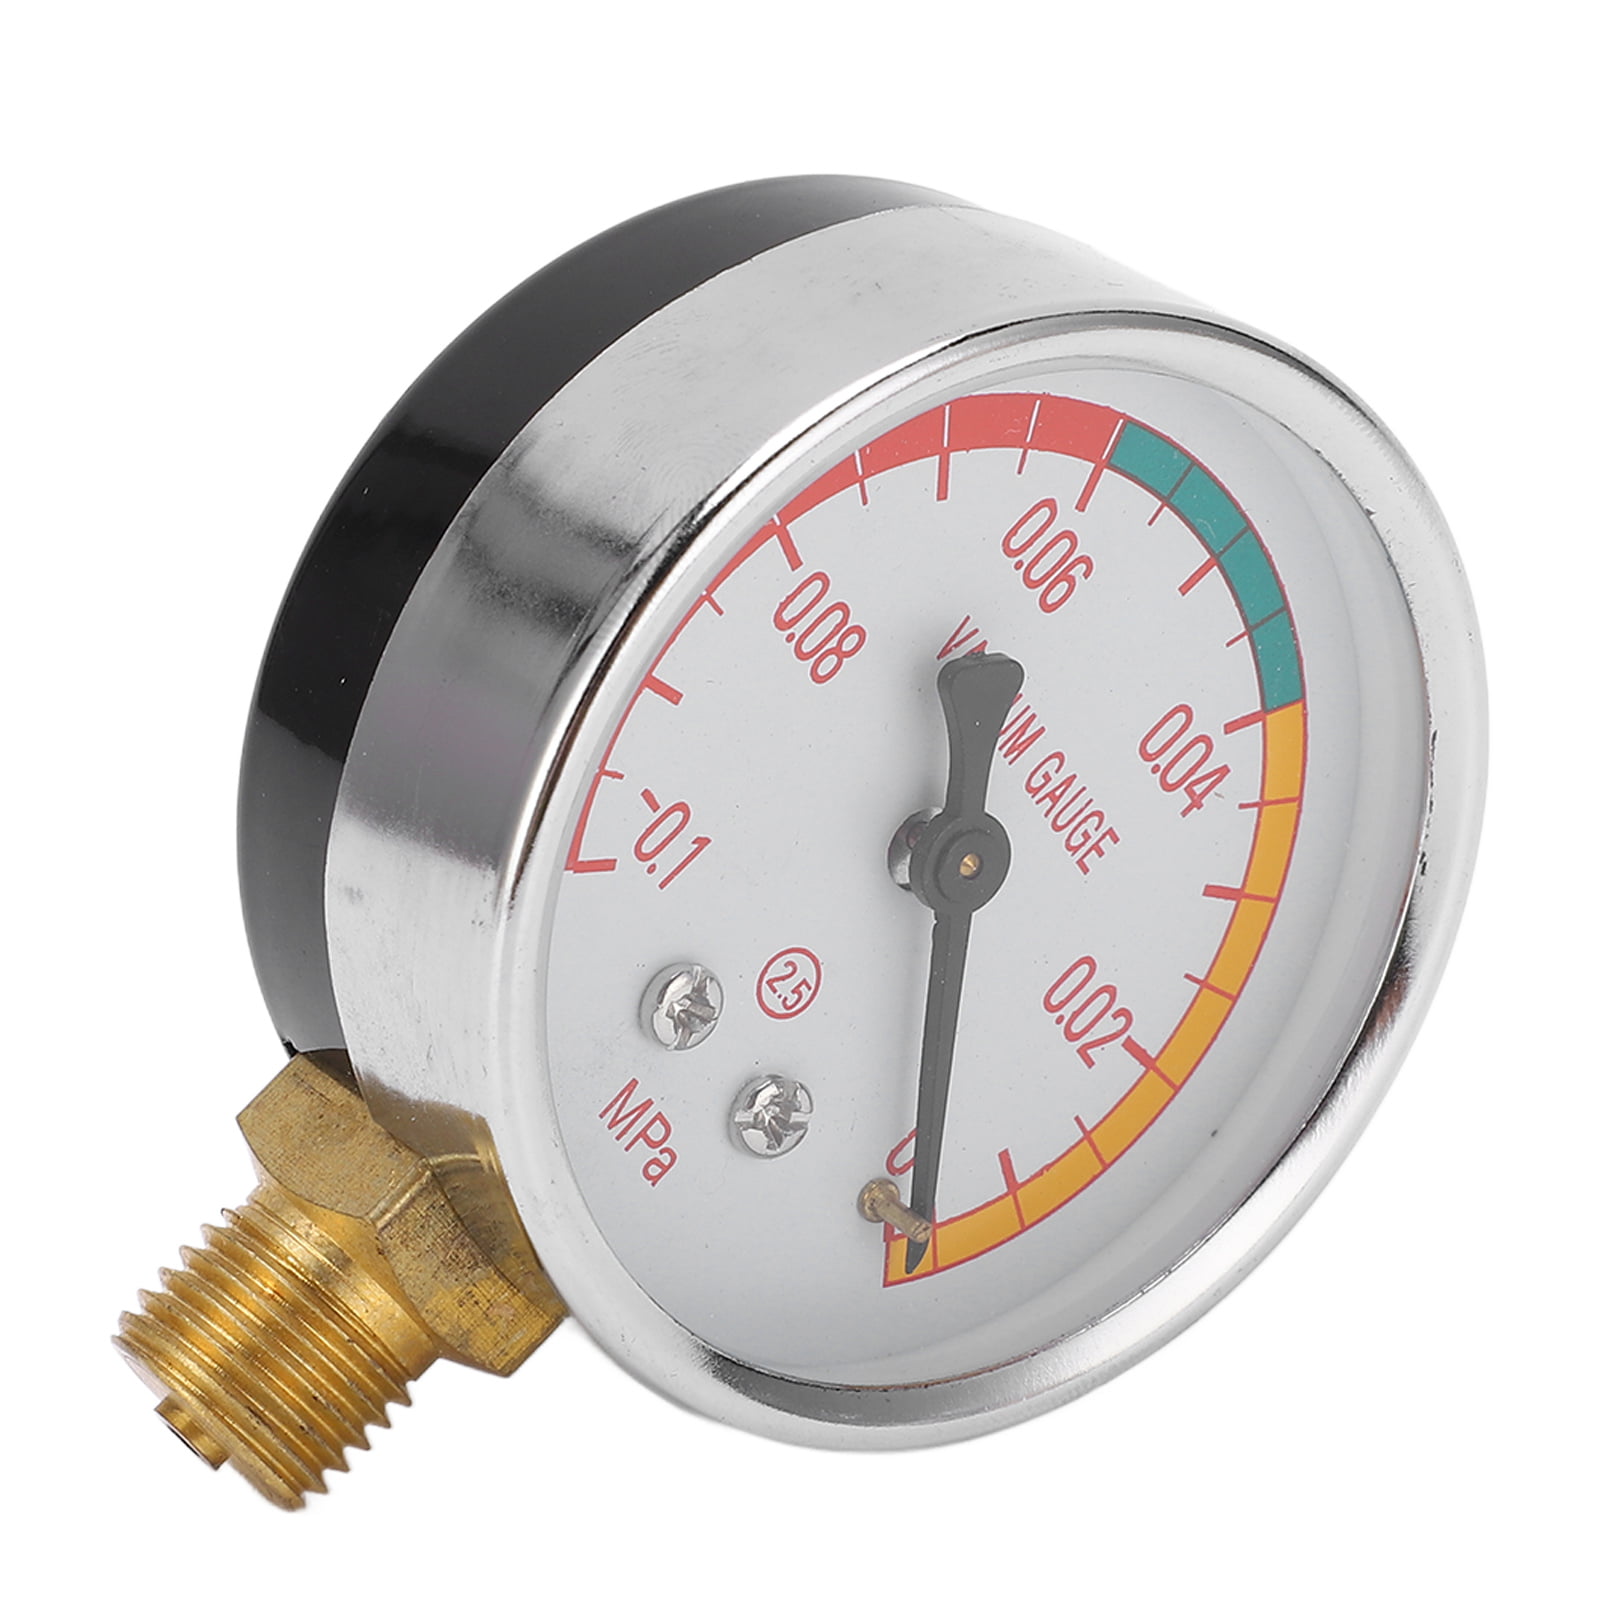 P3 Water Meter P0550 International Usage Direct for sale online 